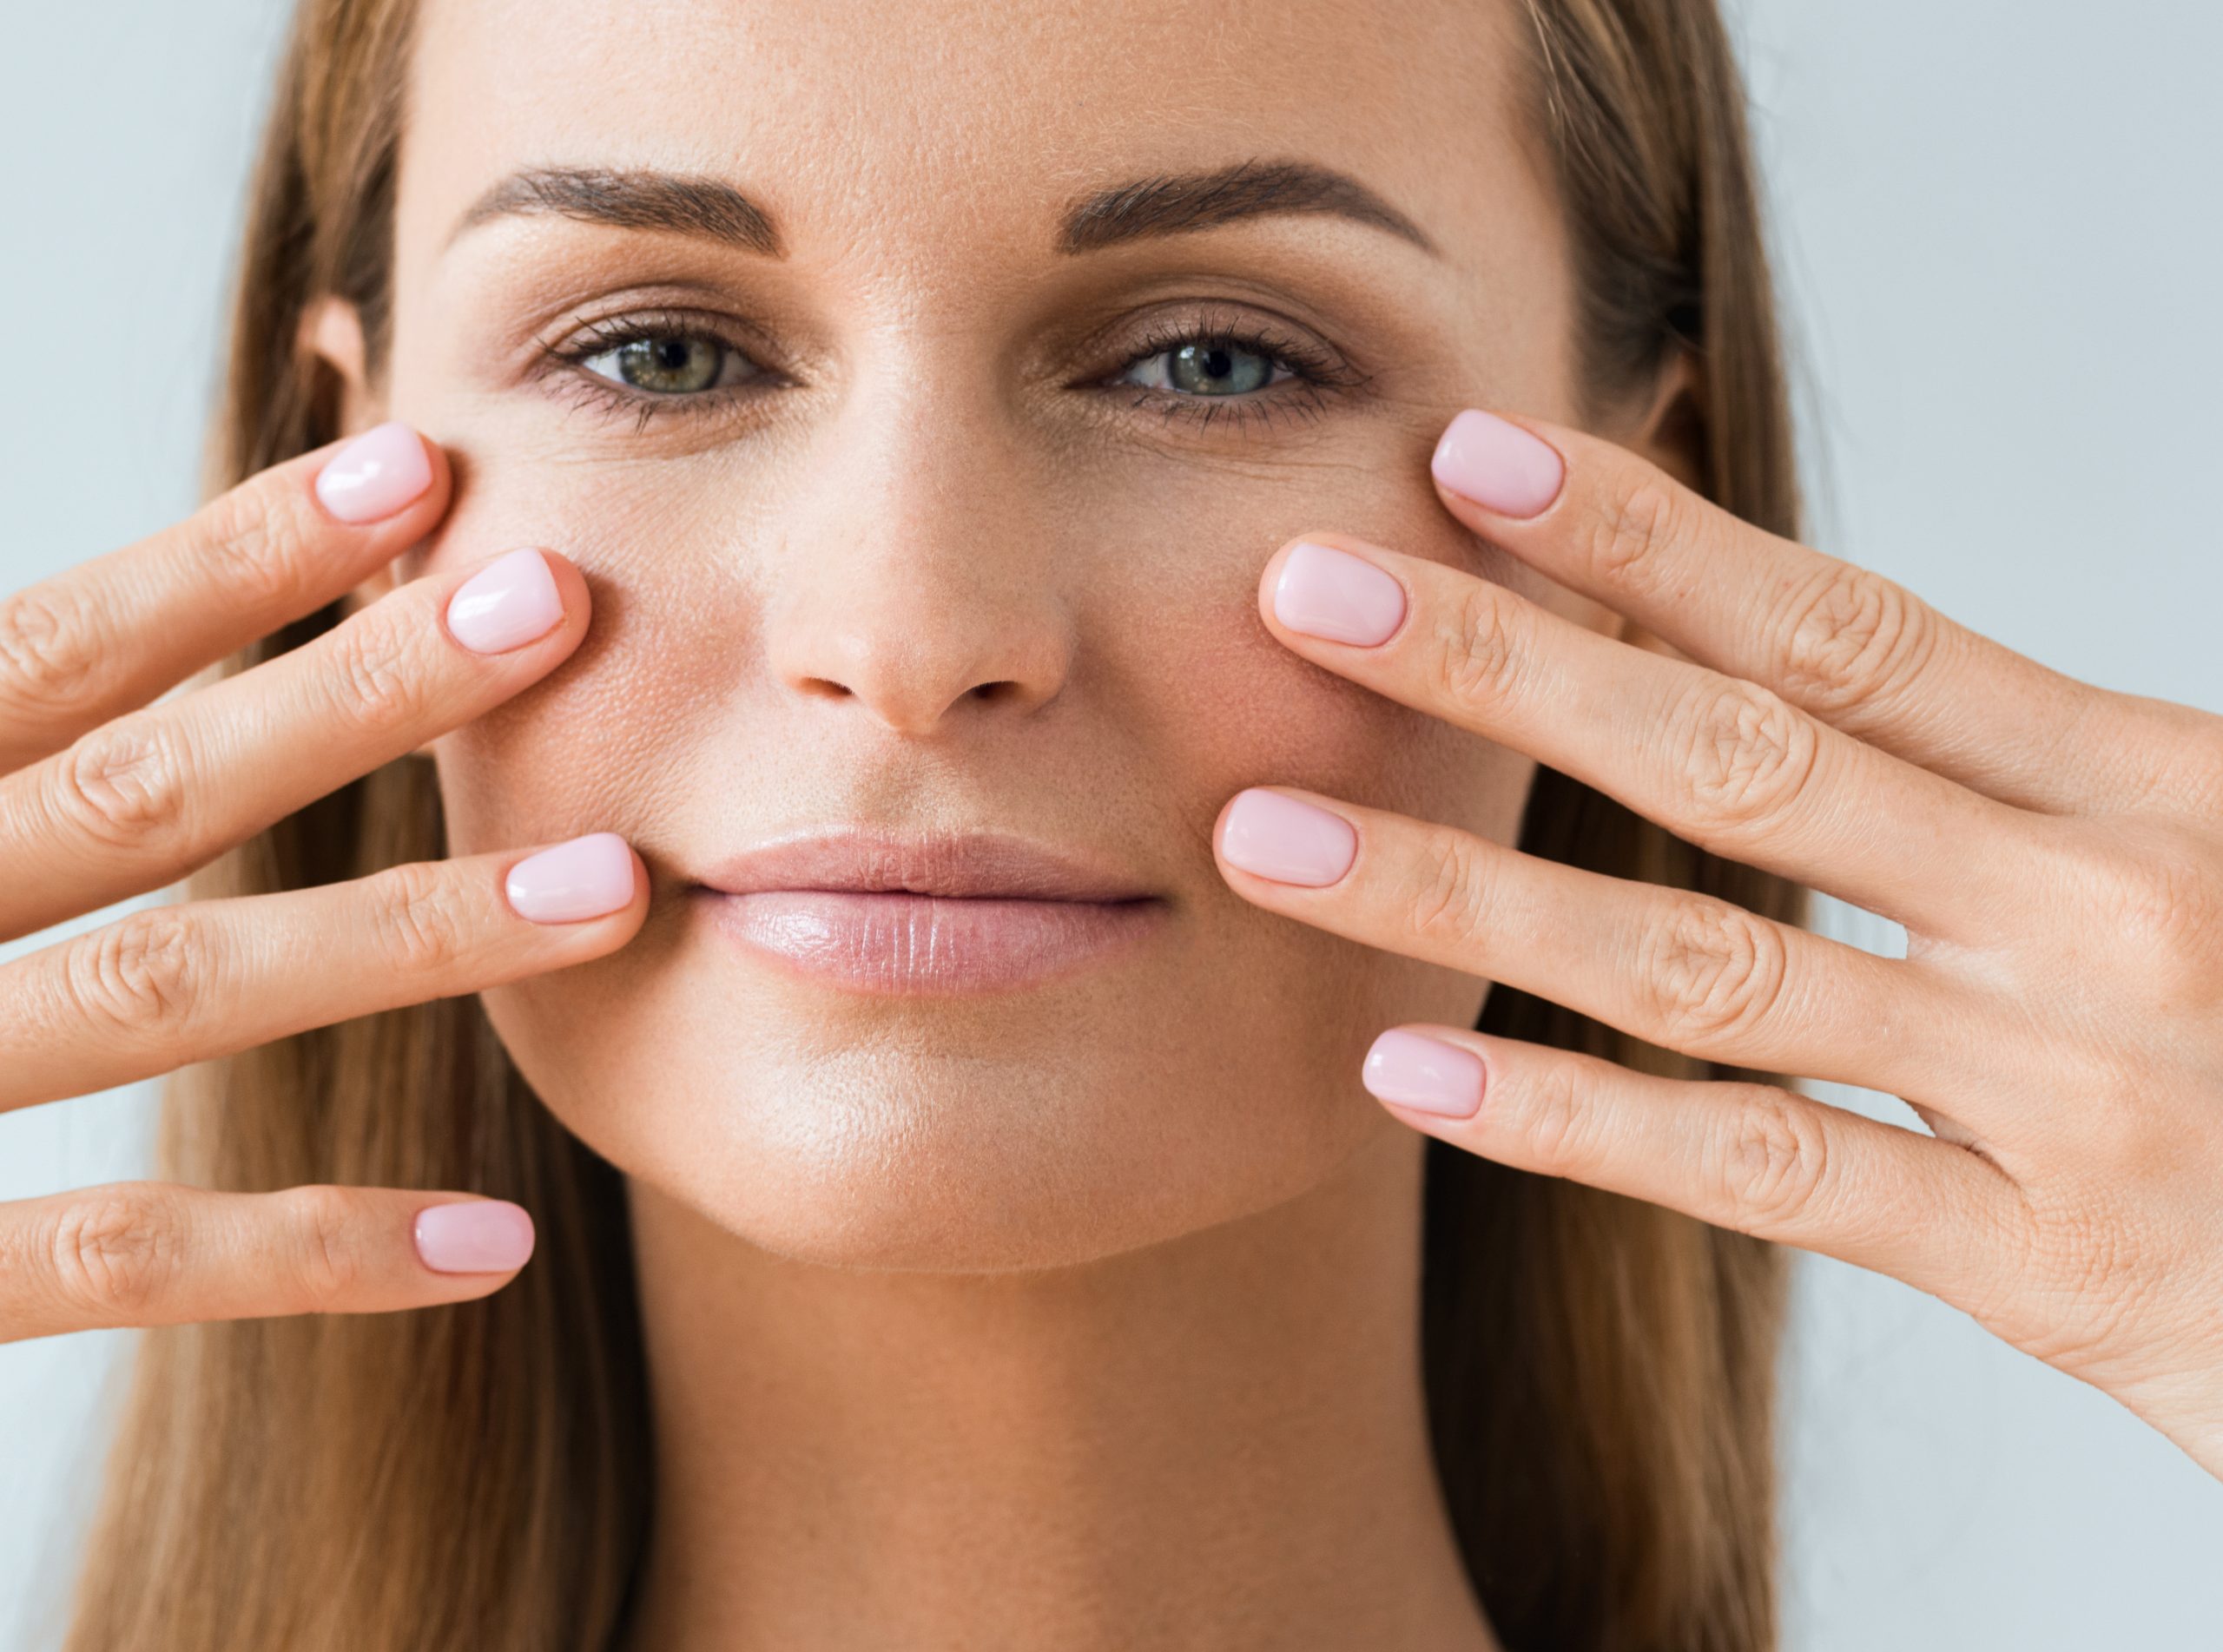 Everything you need to know about microdermabrasion